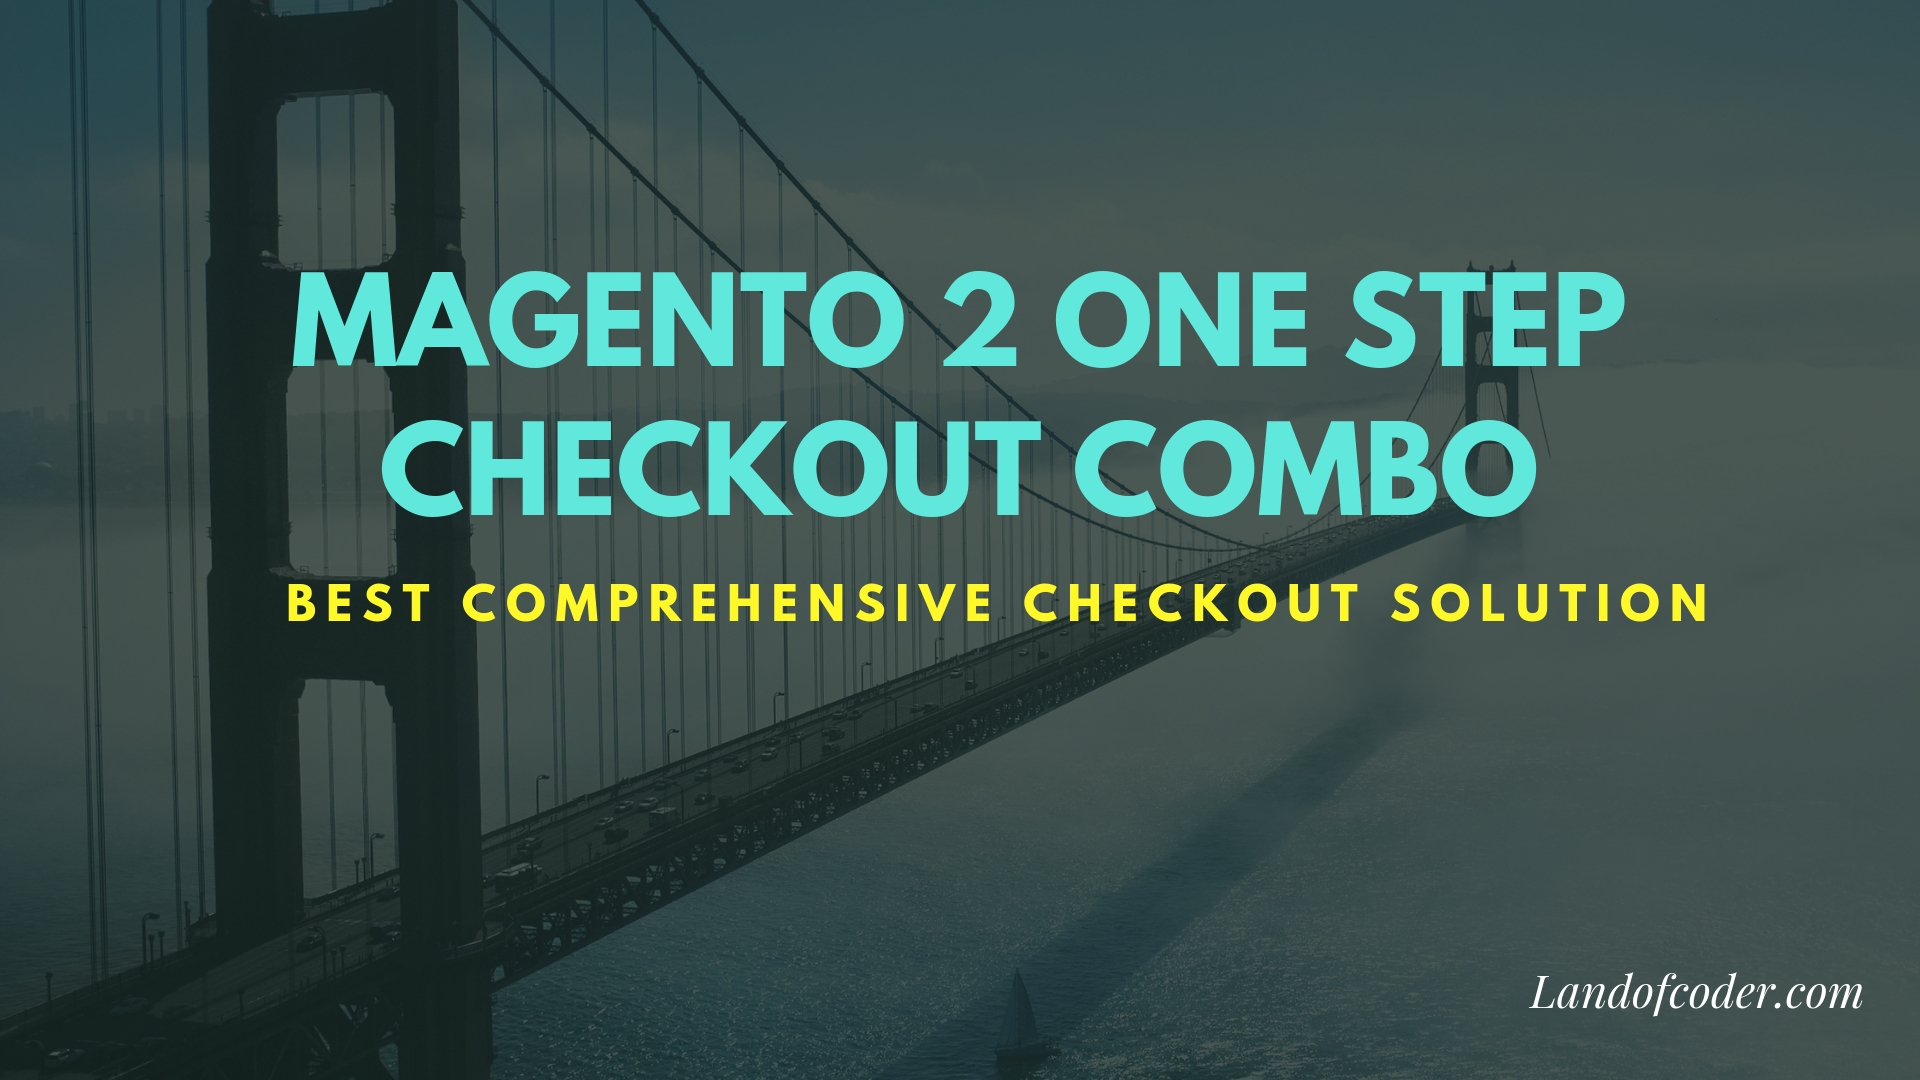 Magento 2 One Step Checkout Combo - Best Comprehension Checkout Solution